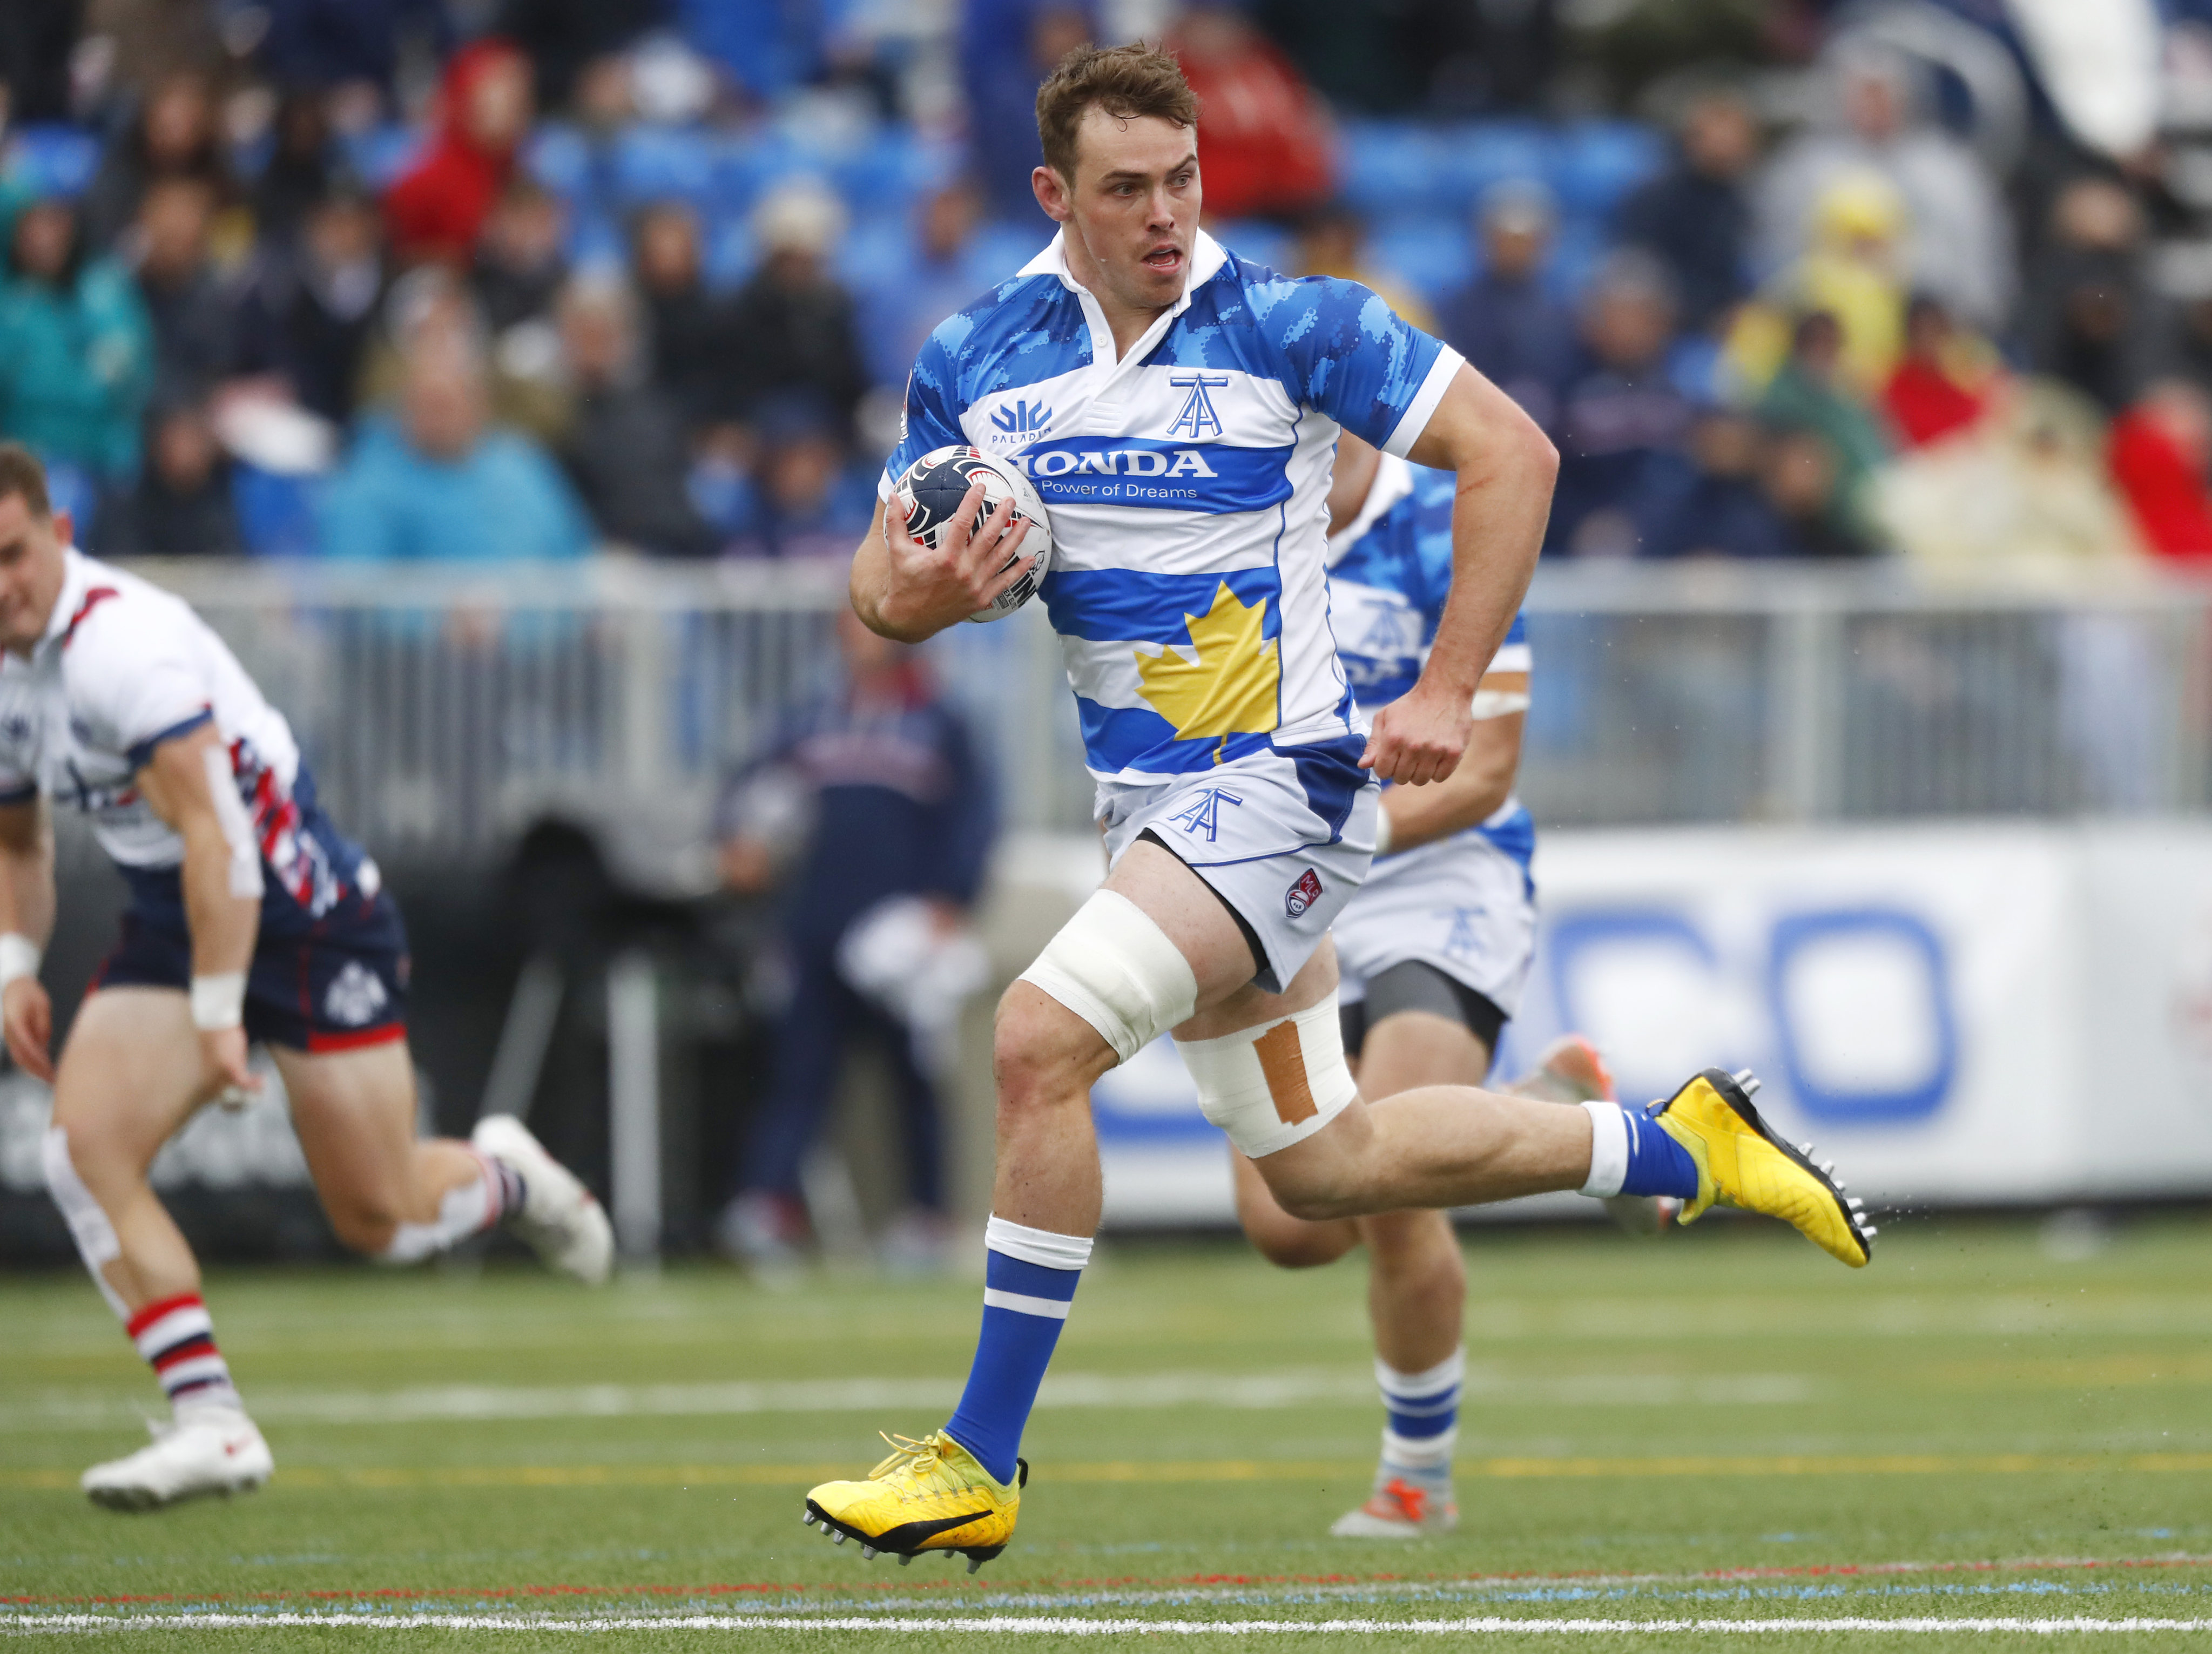 Under a new partnership with Canadian rugby player Adrian Wadden of Toronto Arrows will move to Hong Kong. Photo: Getty Images